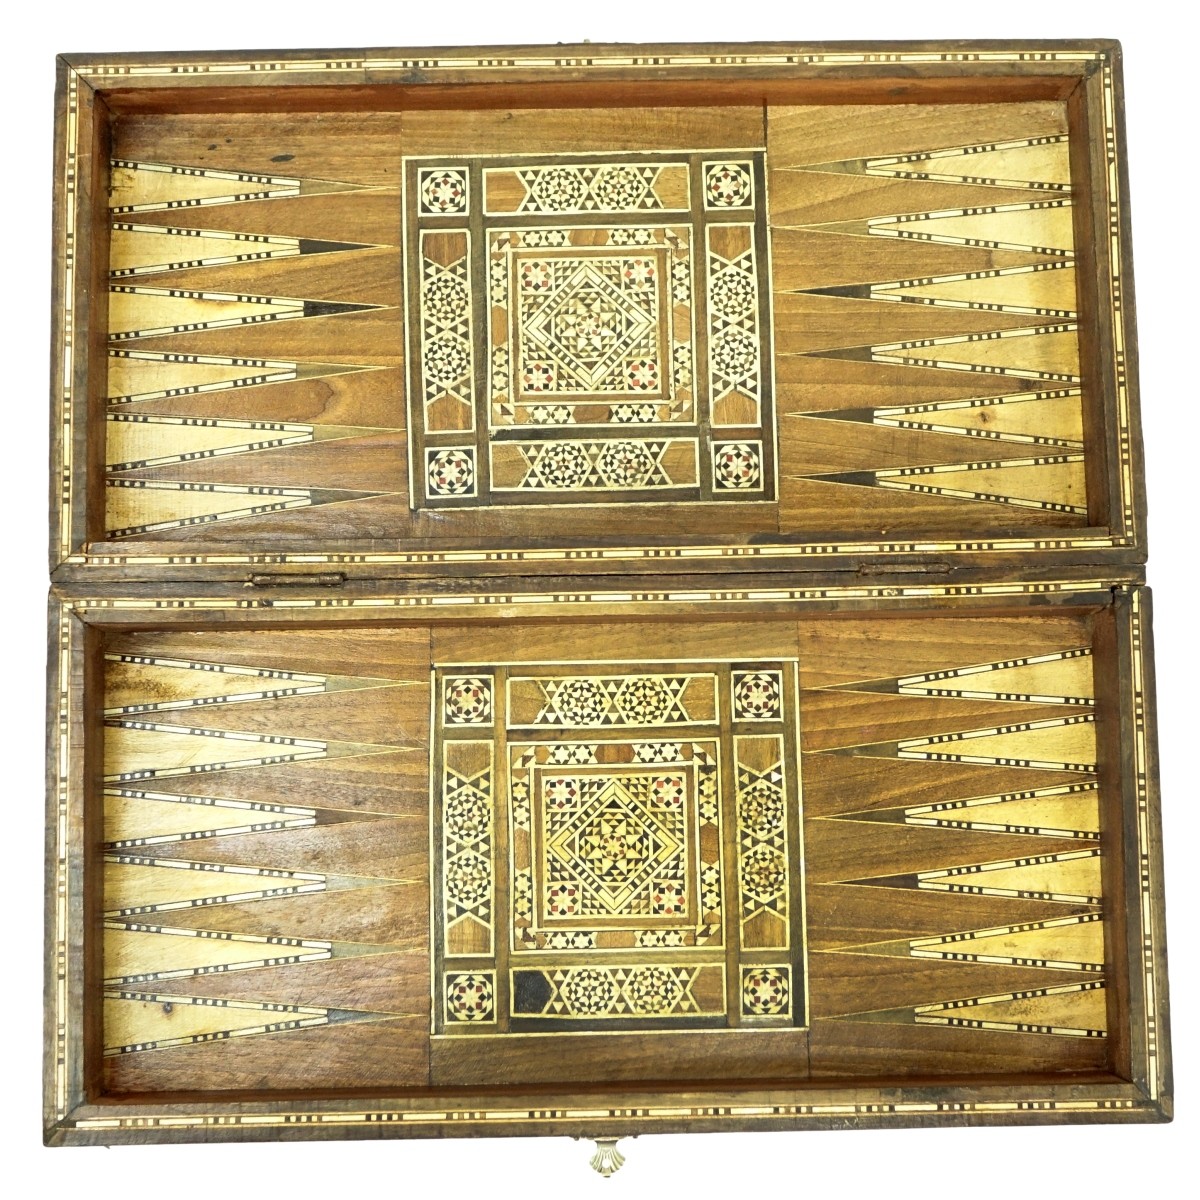 Middle Eastern Marquetry and MOP Inlaid Game board